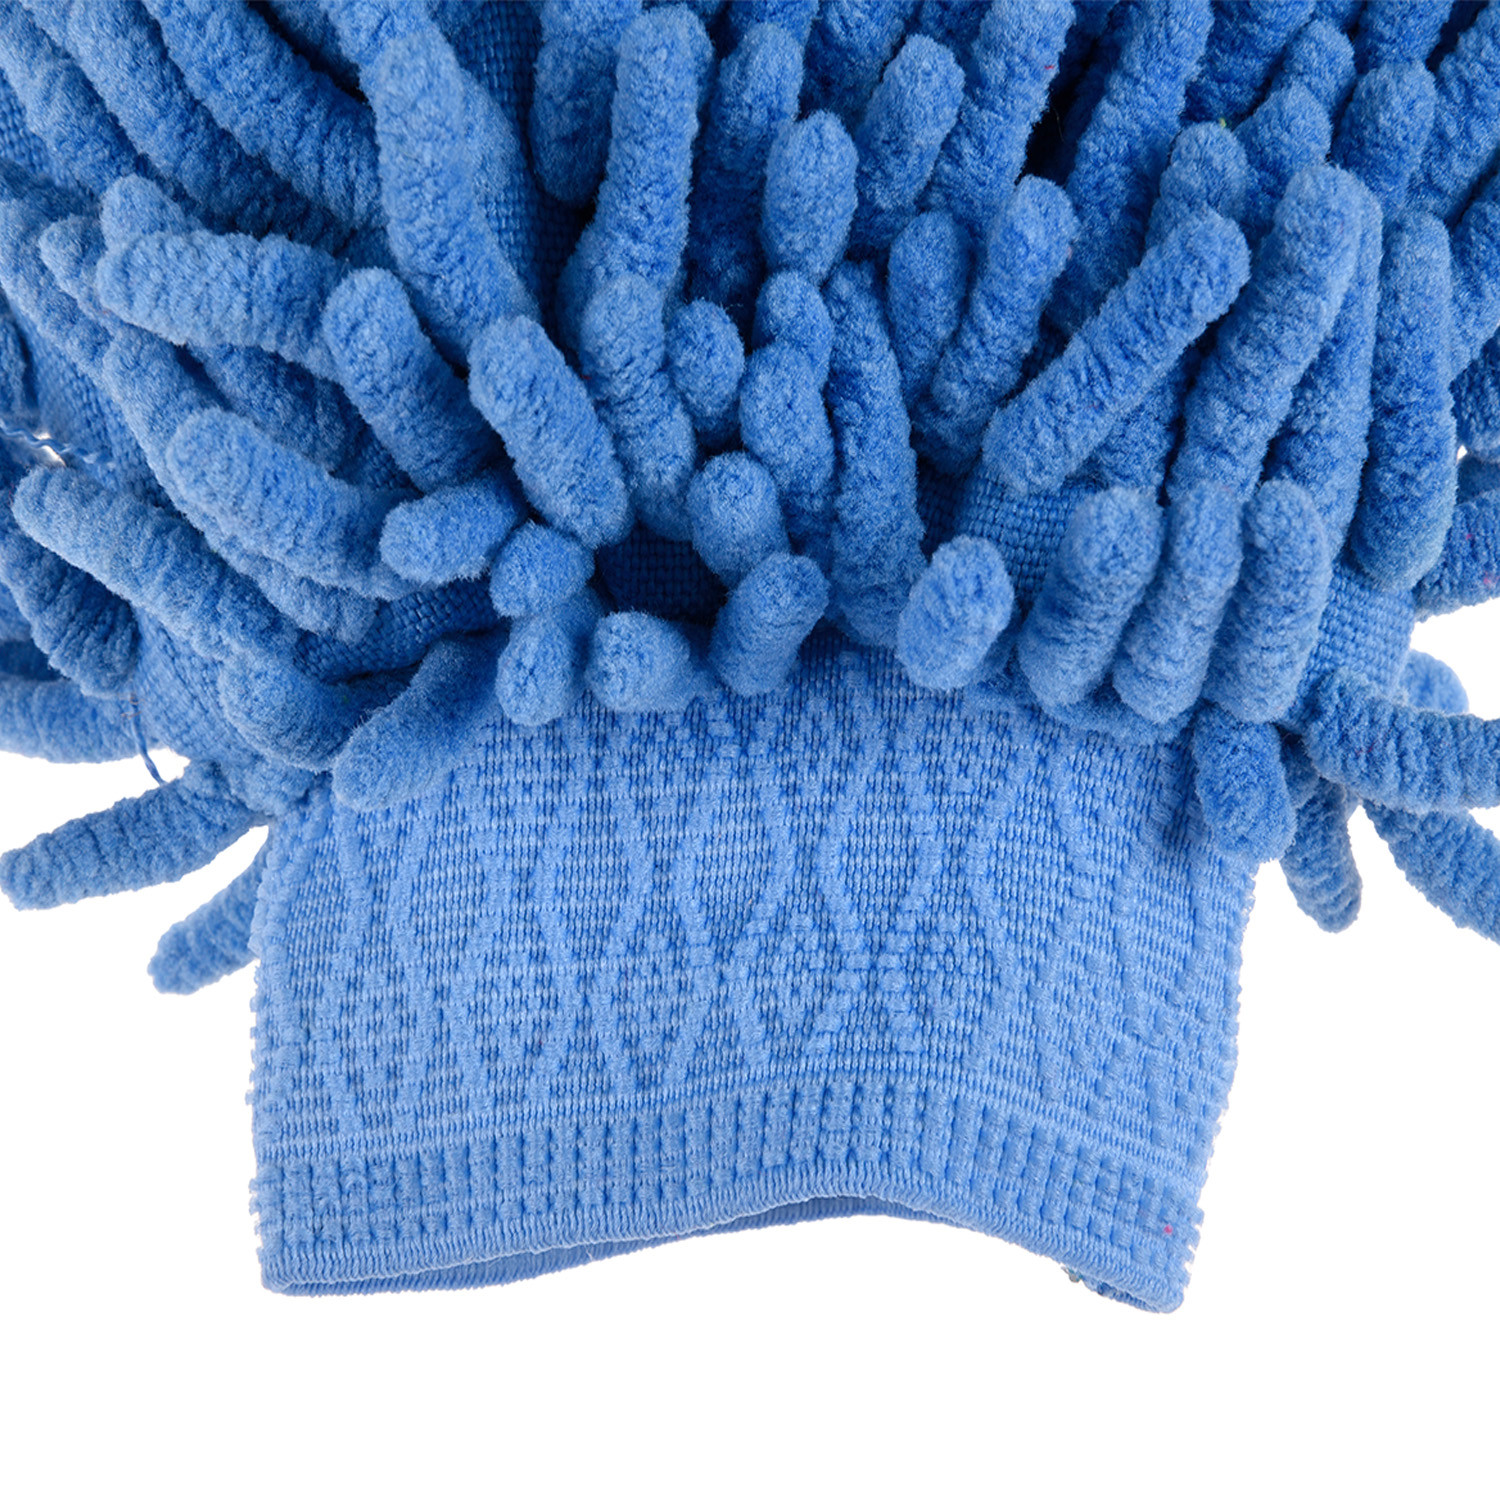 Kuber Industries Chenille Mitts|Microfiber Cleaning Gloves|Inside Waterproof Cloth Gloves|100 Gram Weighted Hand Duster|Chenille Gloves For Car|Glass|Pack of 2 (Blue & Pink)